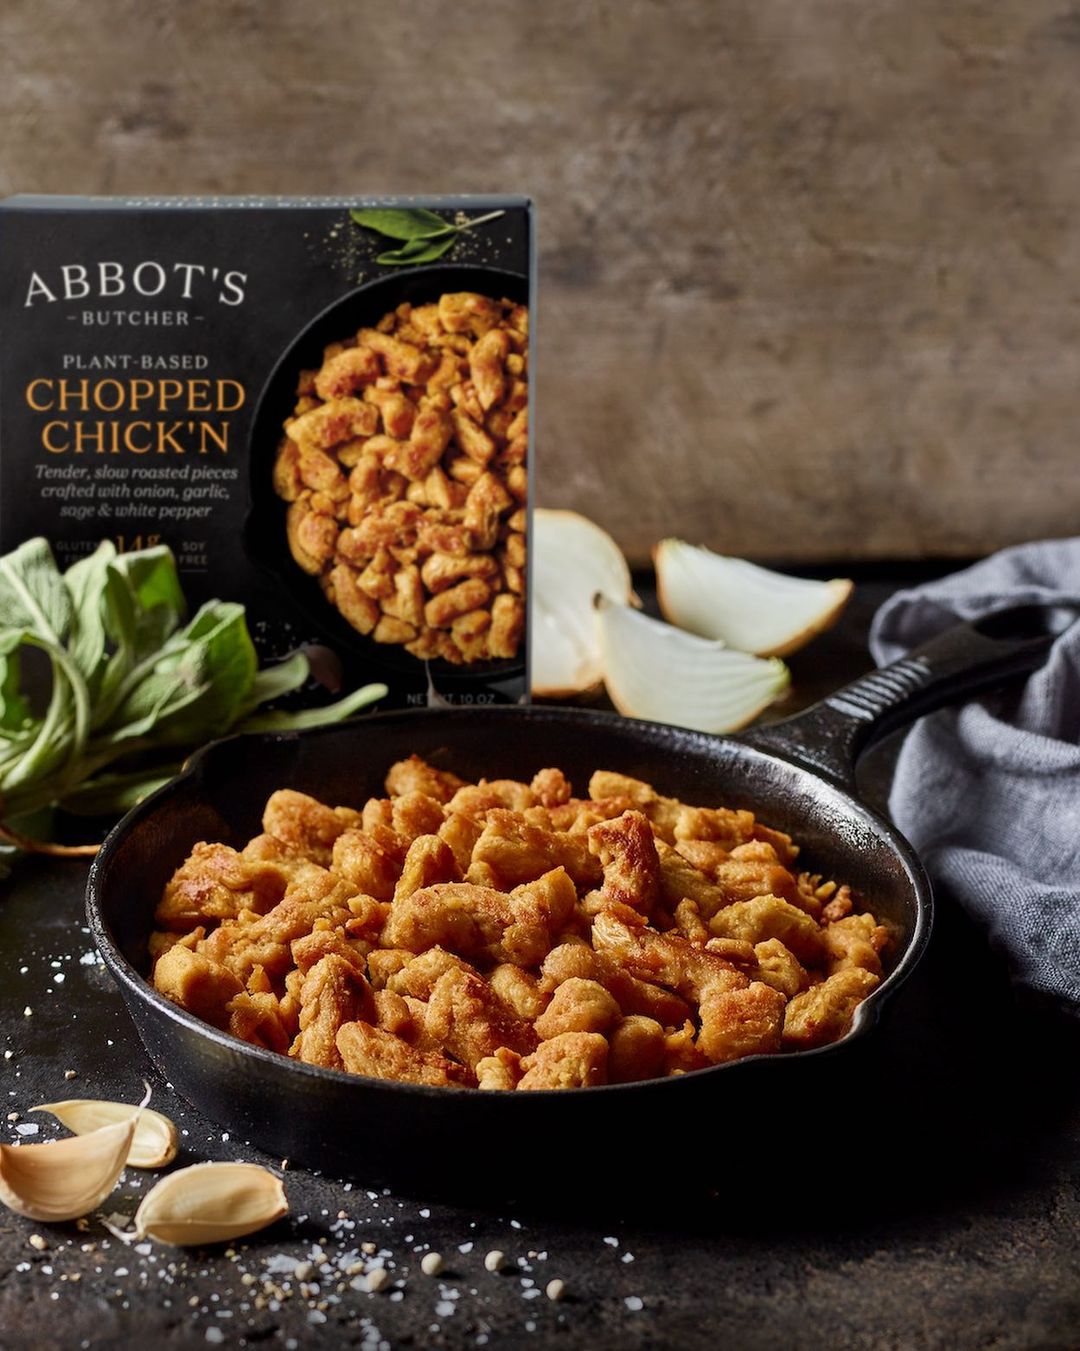 Package of Abbot's Butcher with plant-based meat in skillet 